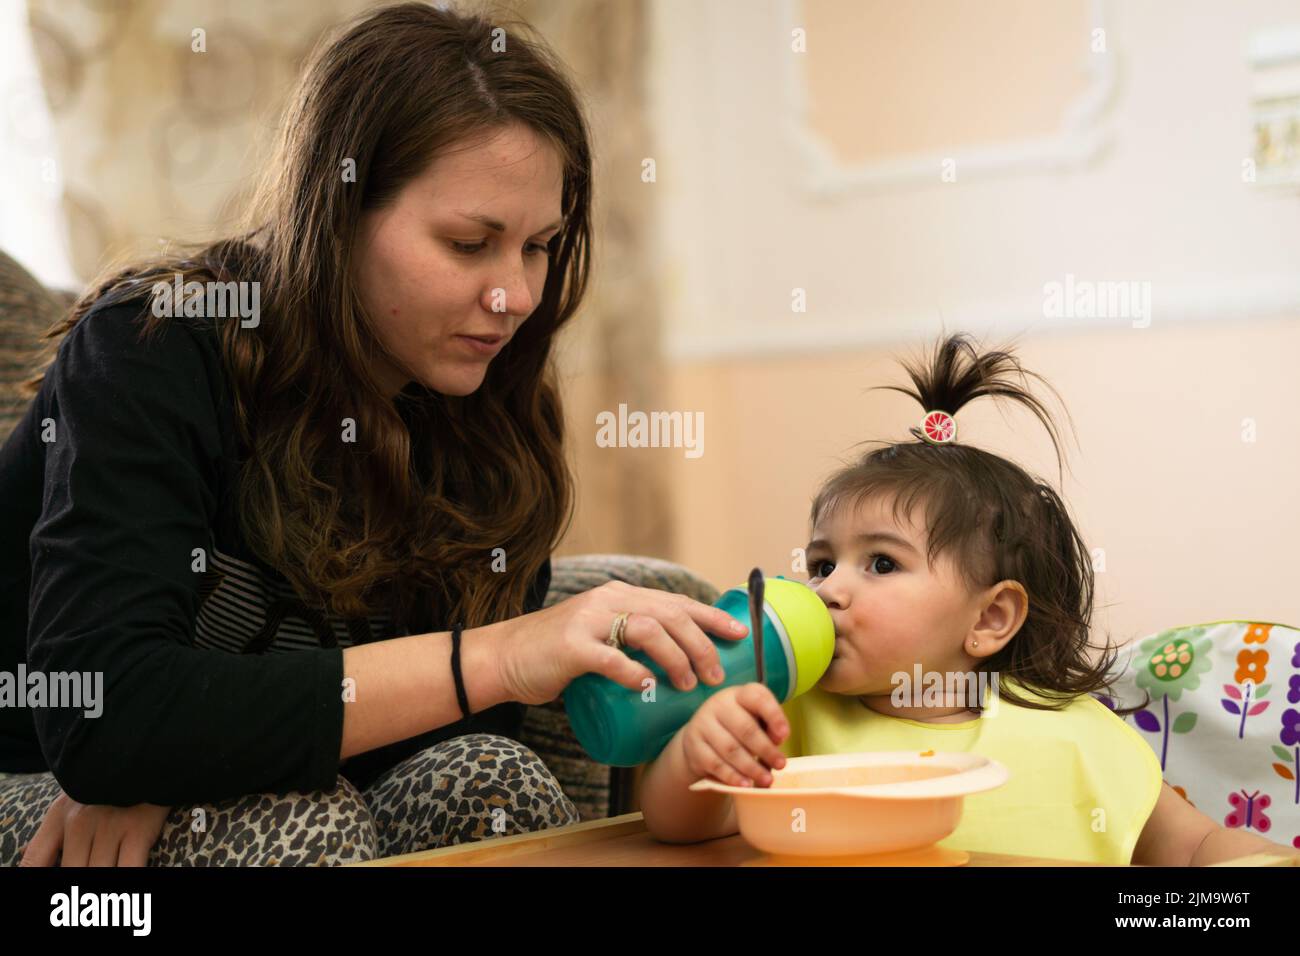 A close upbeautiful woman with her daughter giving her lunch and drinking water, light colors Stock Photo